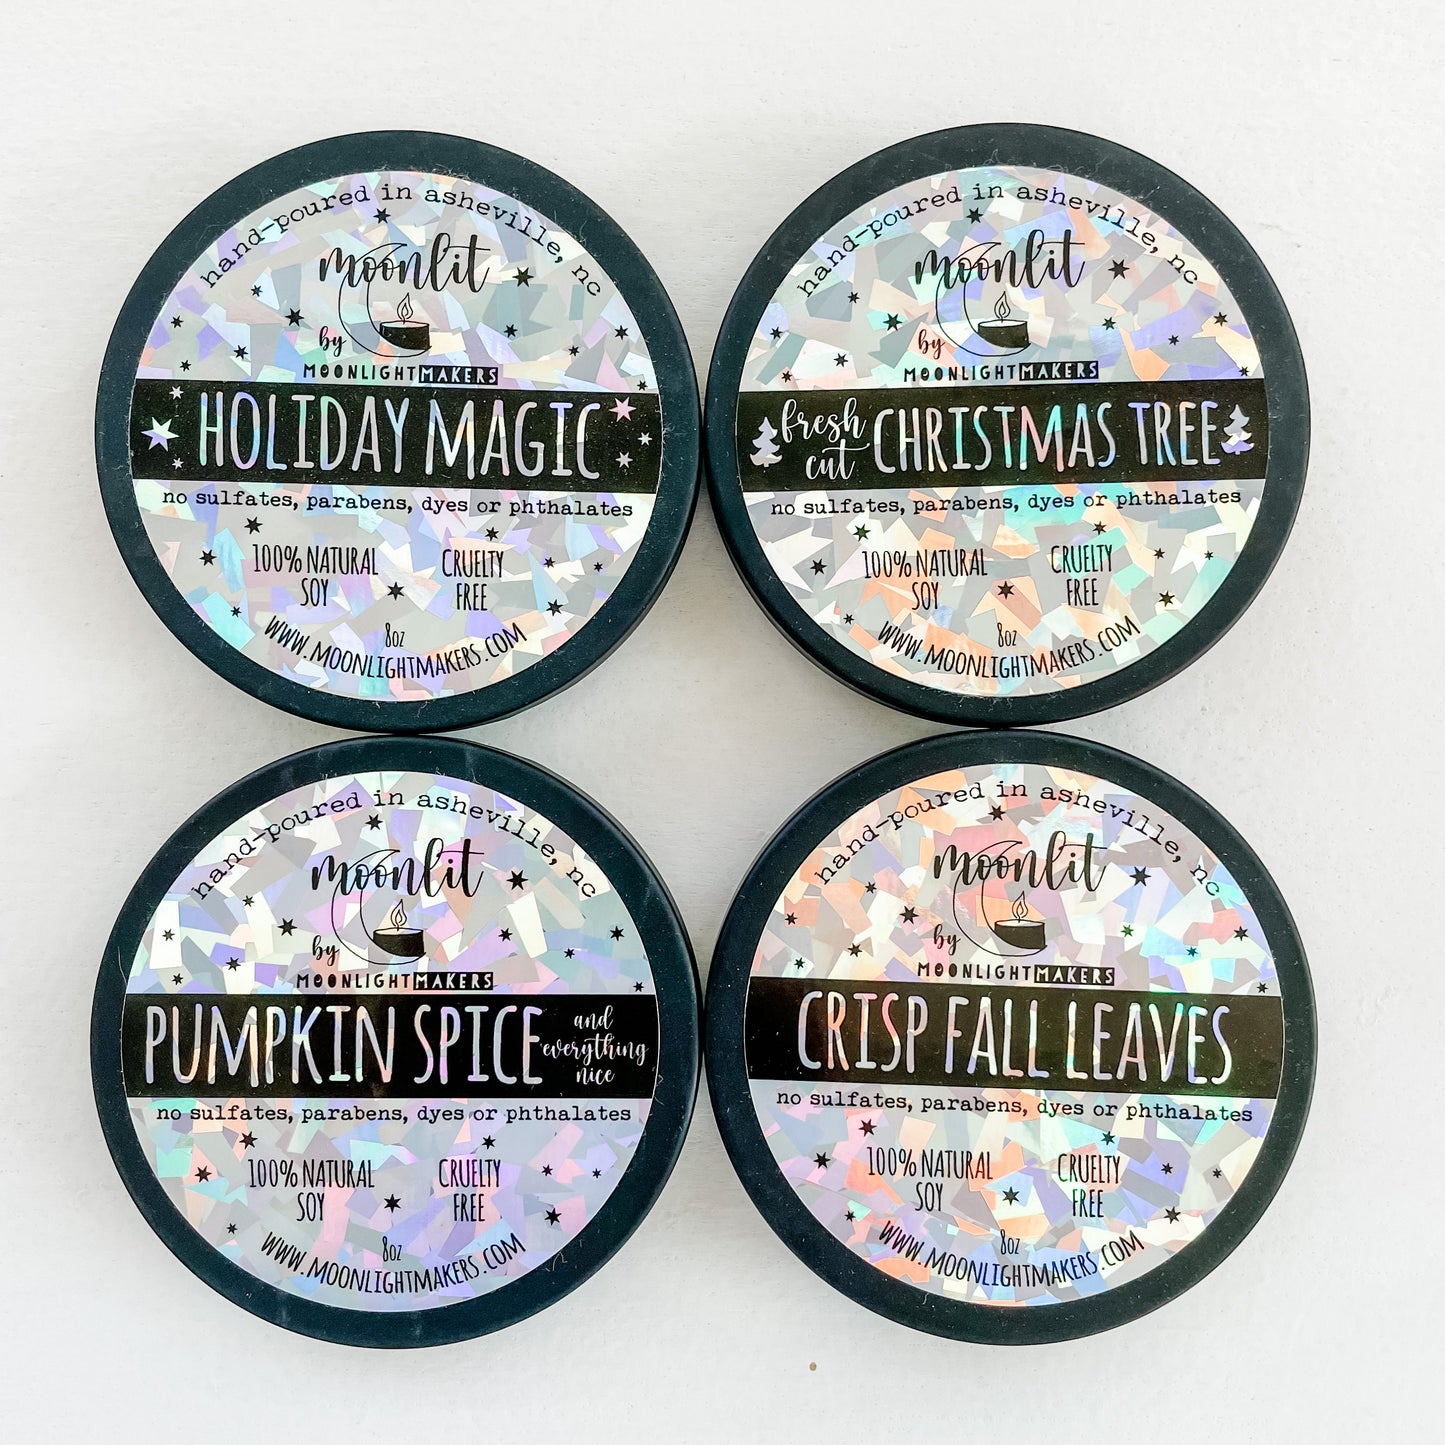 Libra / Zodiac Candle - 8oz Candle - Choose Your Scent - 100% Natural Soy Wax